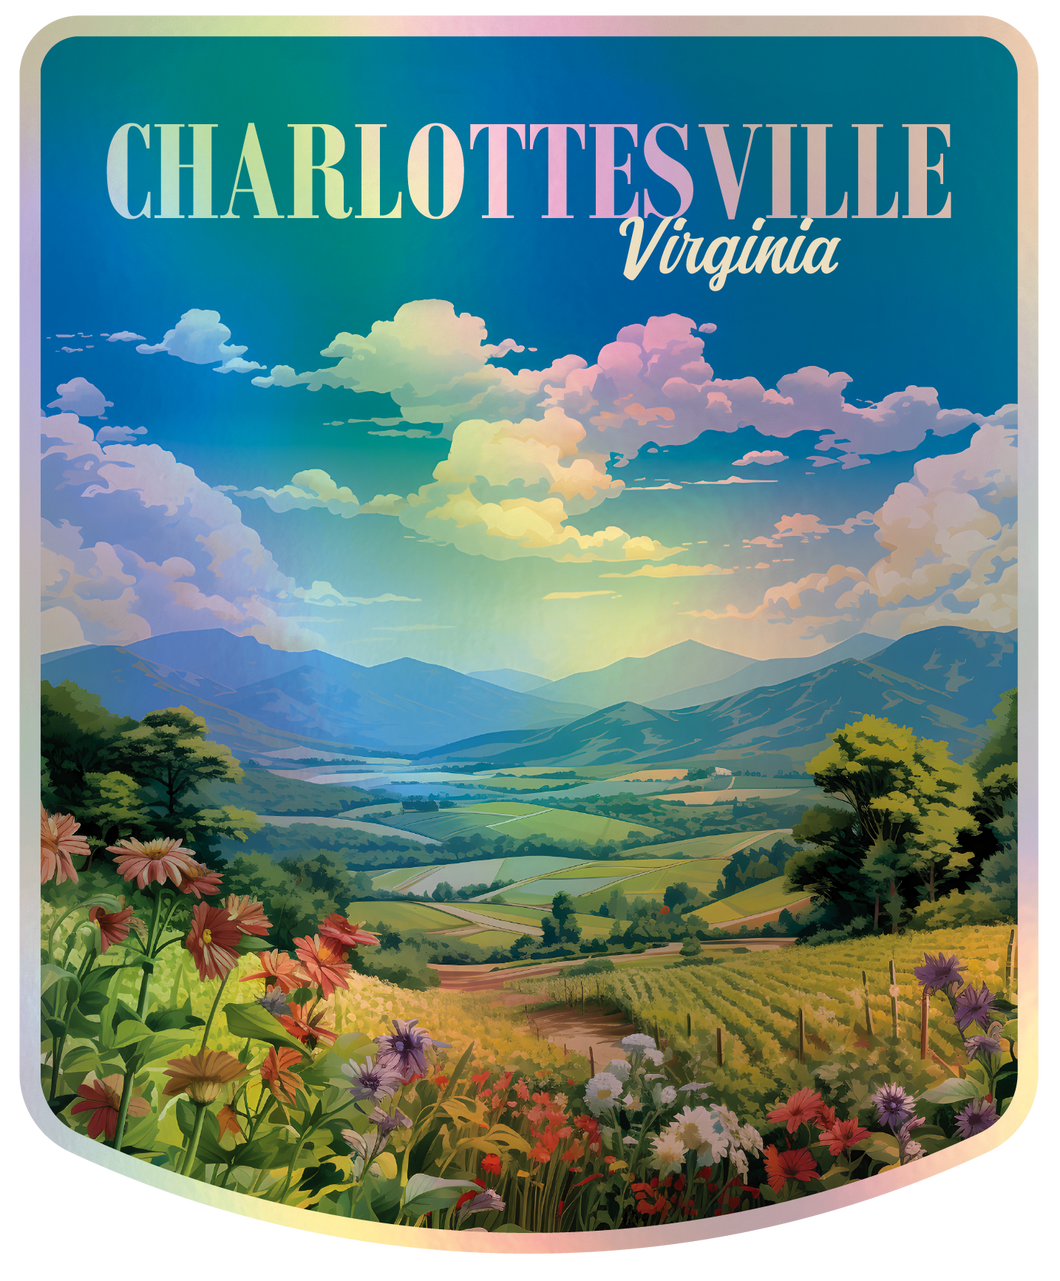 Chalottesville Virgina Holographic Charm Durable Vinyl Decal Sticker A